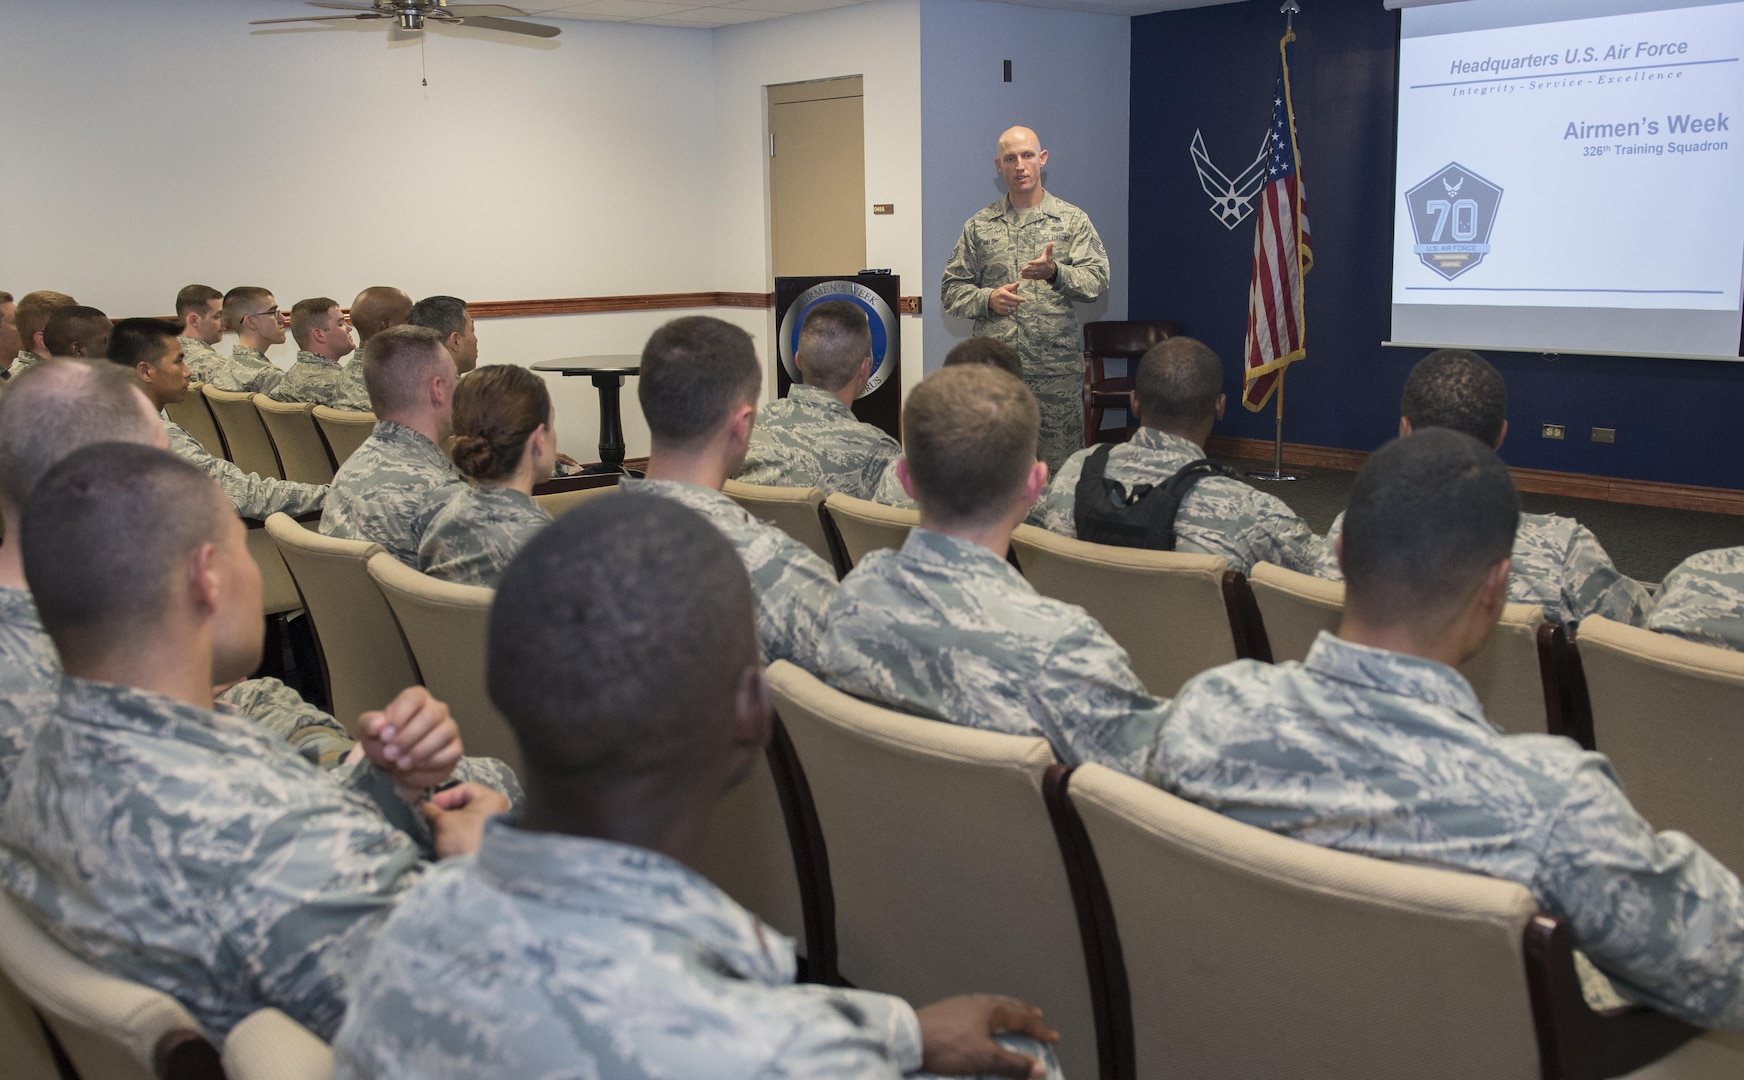 Tech. Sgt. Matthew Walsh, 326th Training Squadron NCO in charge of standardizations and evaluations, talks to chaplain candidates about Airmen's Week at Joint Base San Antonio-Lackland, Texas, July 5, 2017. The tour was part of the Chaplain Candidate Intensive Internship. Airmen attend Airmen's Week, a week-long course, after graduating from Basic Military Training. (U.S. Air Force photo by Senior Airman Krystal Wright)